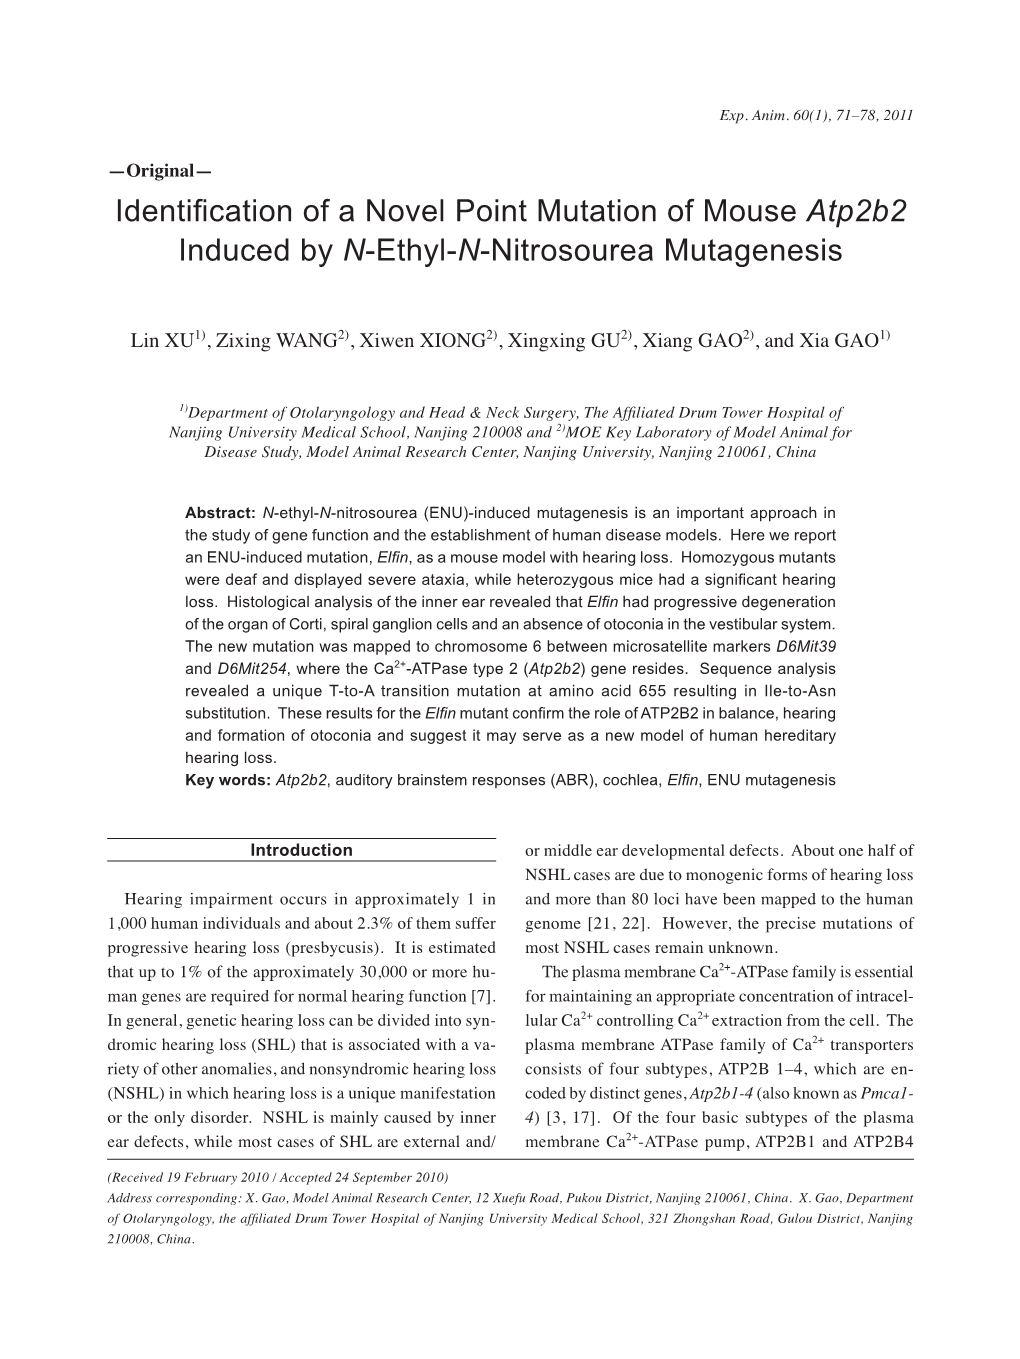 Identification of a Novel Point Mutation of Mouse Atp2b2 Induced by N